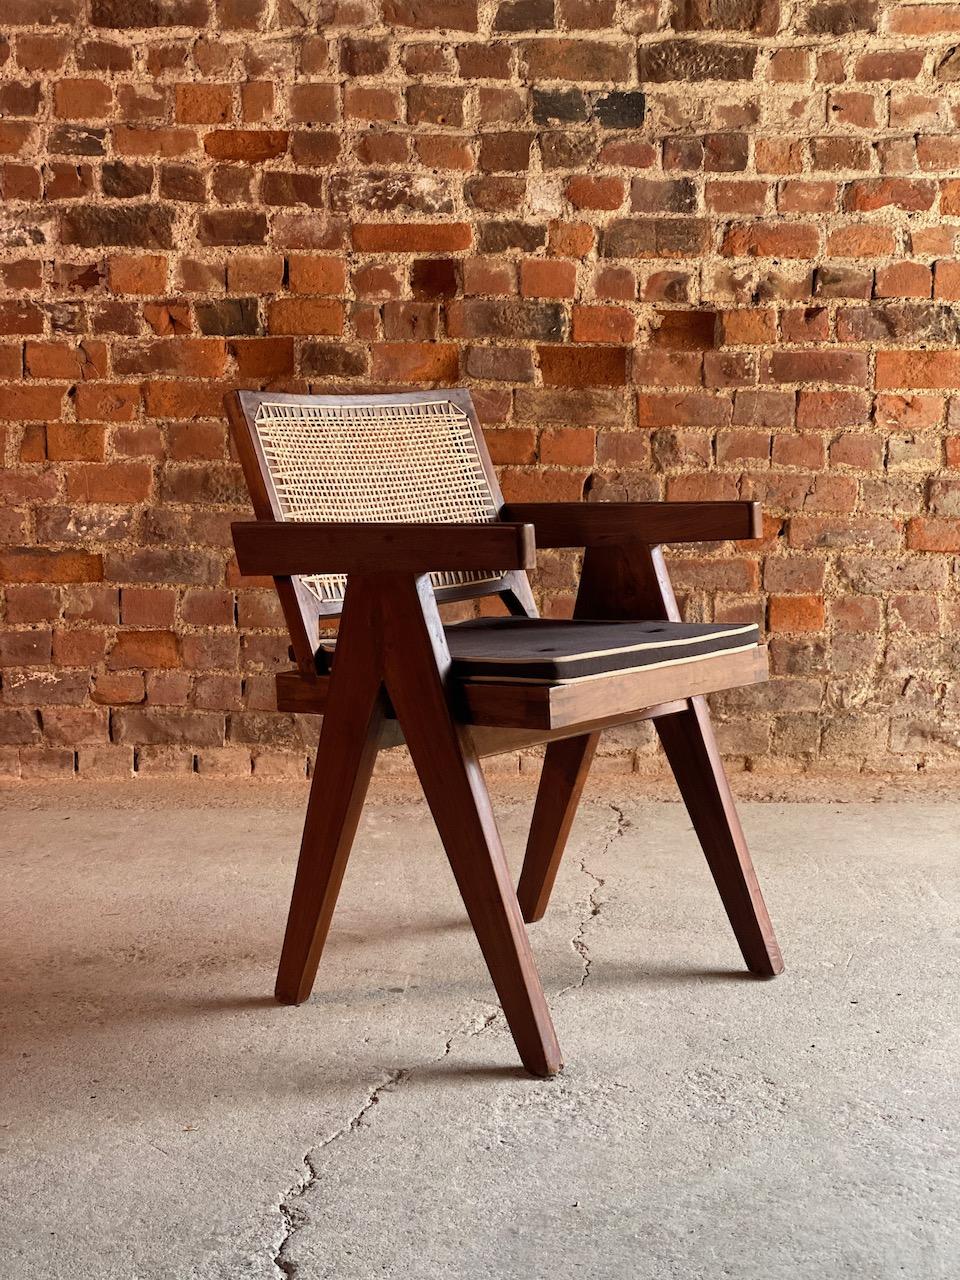 Indian Pierre Jeanneret Desk and Chair, College of Architecture, Chandigarh, circa 1955